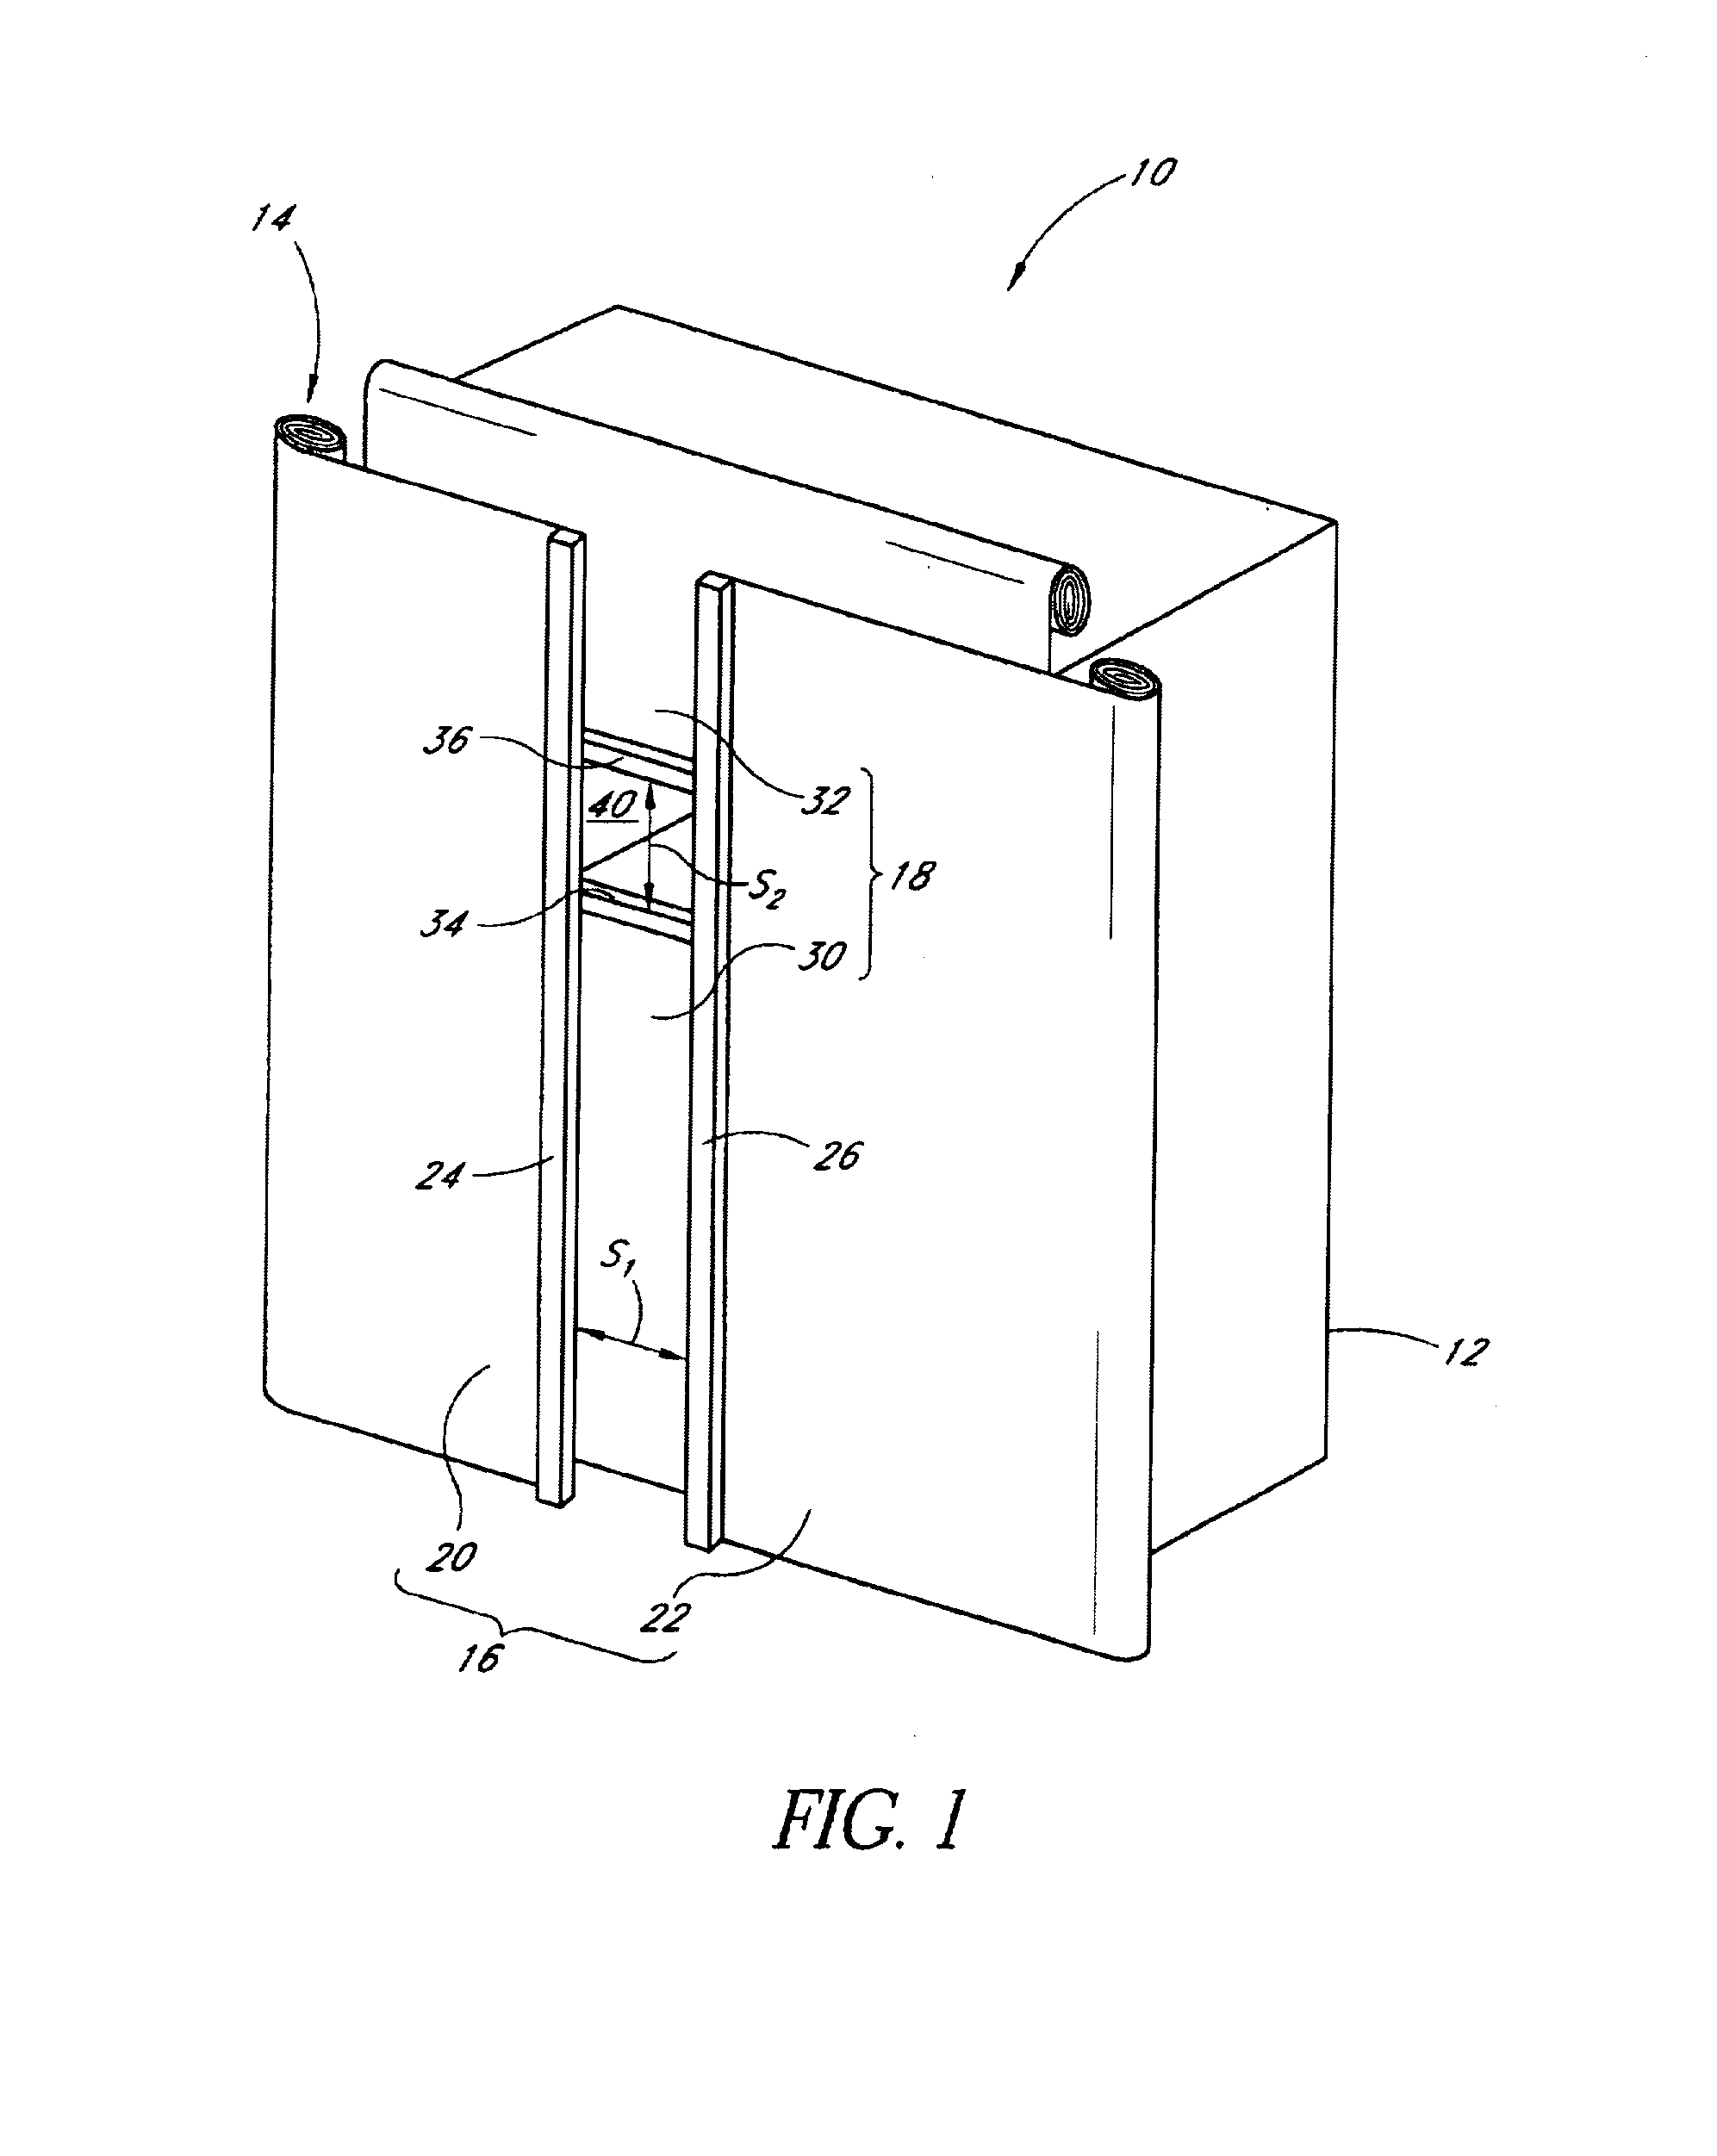 Controlled access dispensing system